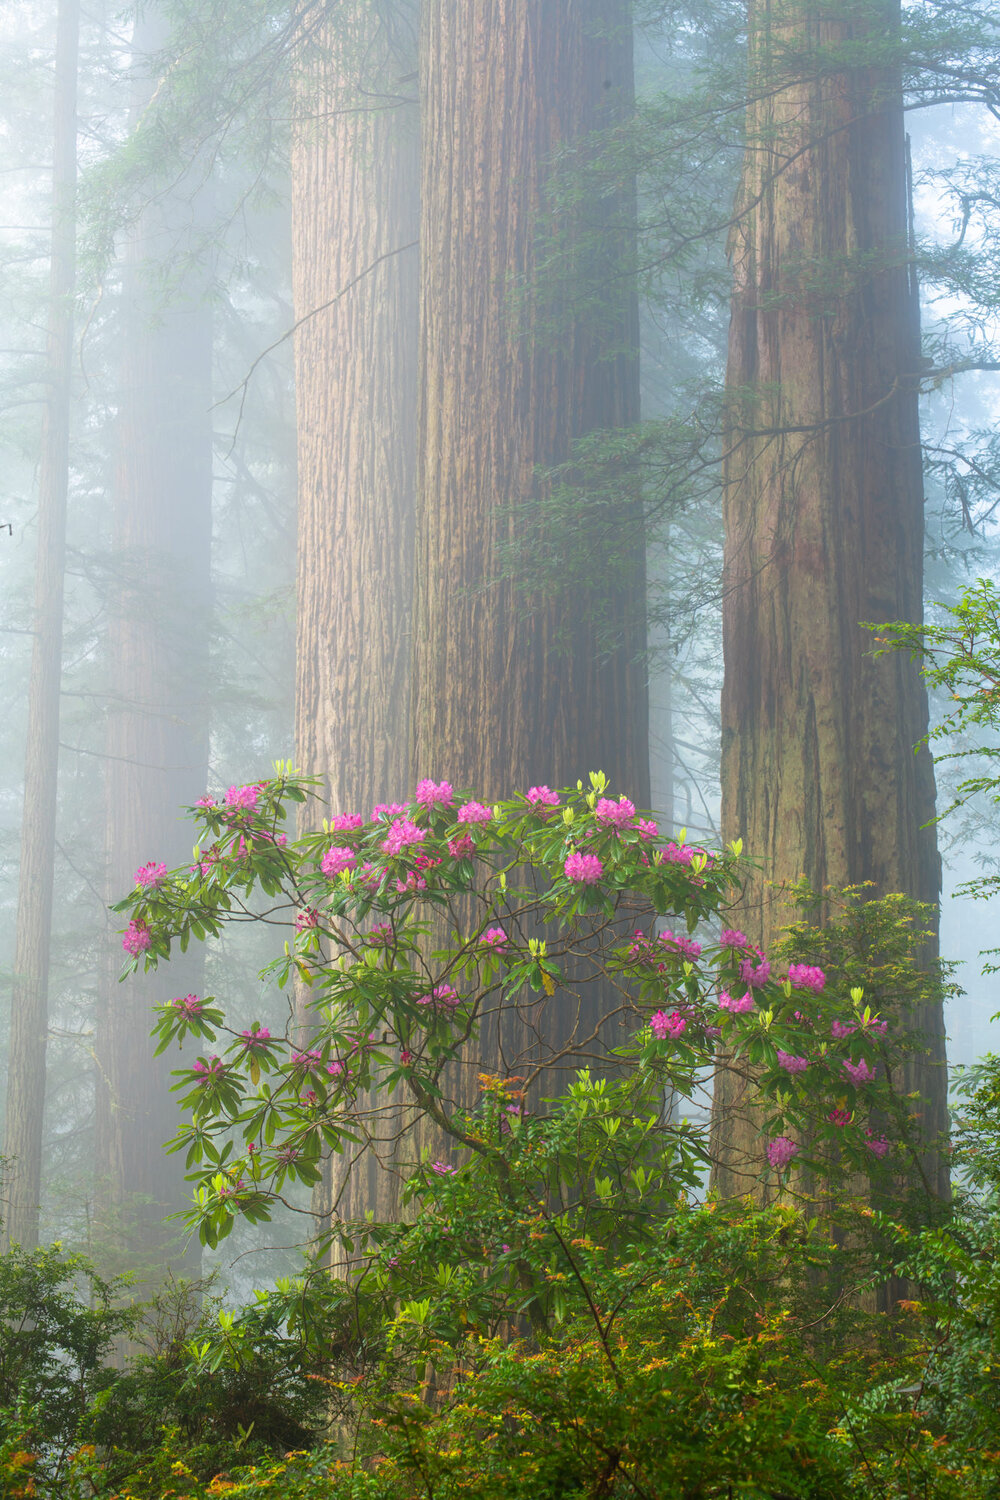 Rhododendron in full bloom in a California Redwood forest - photographed by Chris Byrne. | Photo Title: Giants In The Mist | 
        Photo by Chris Byrne ©2023